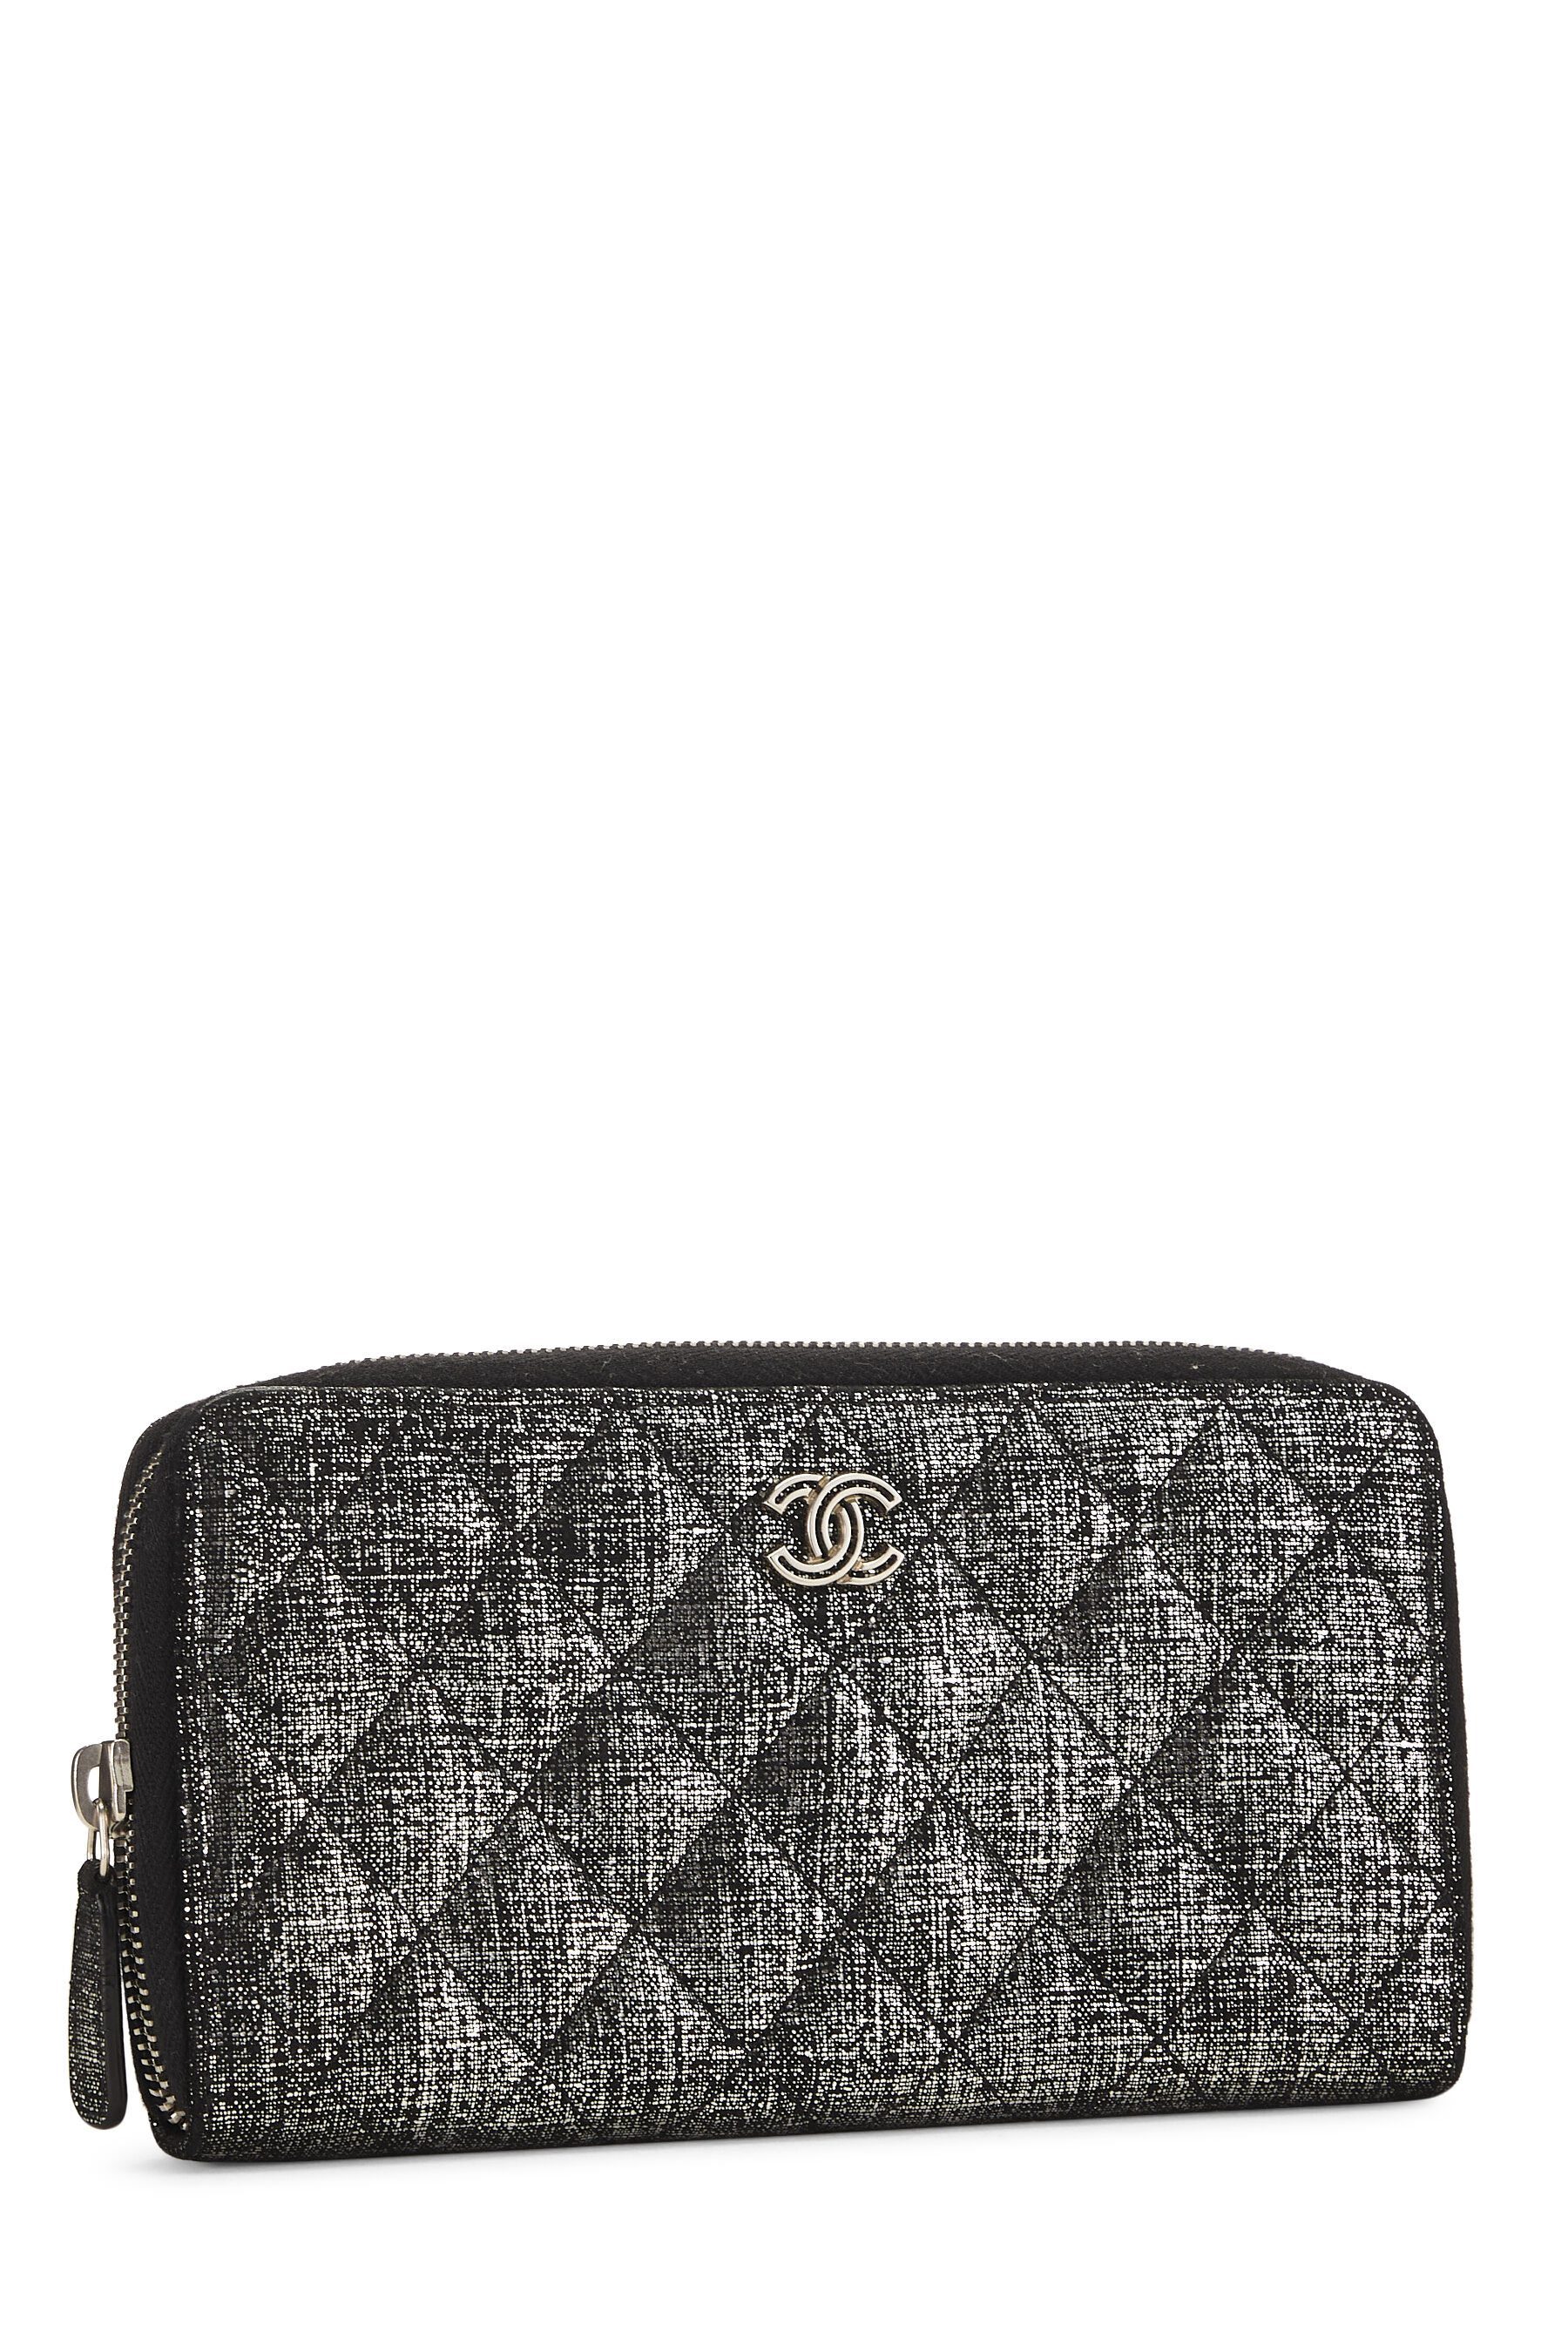 CHANEL Grained Leather Long Flap Wallet Silver-Tone Metal-US